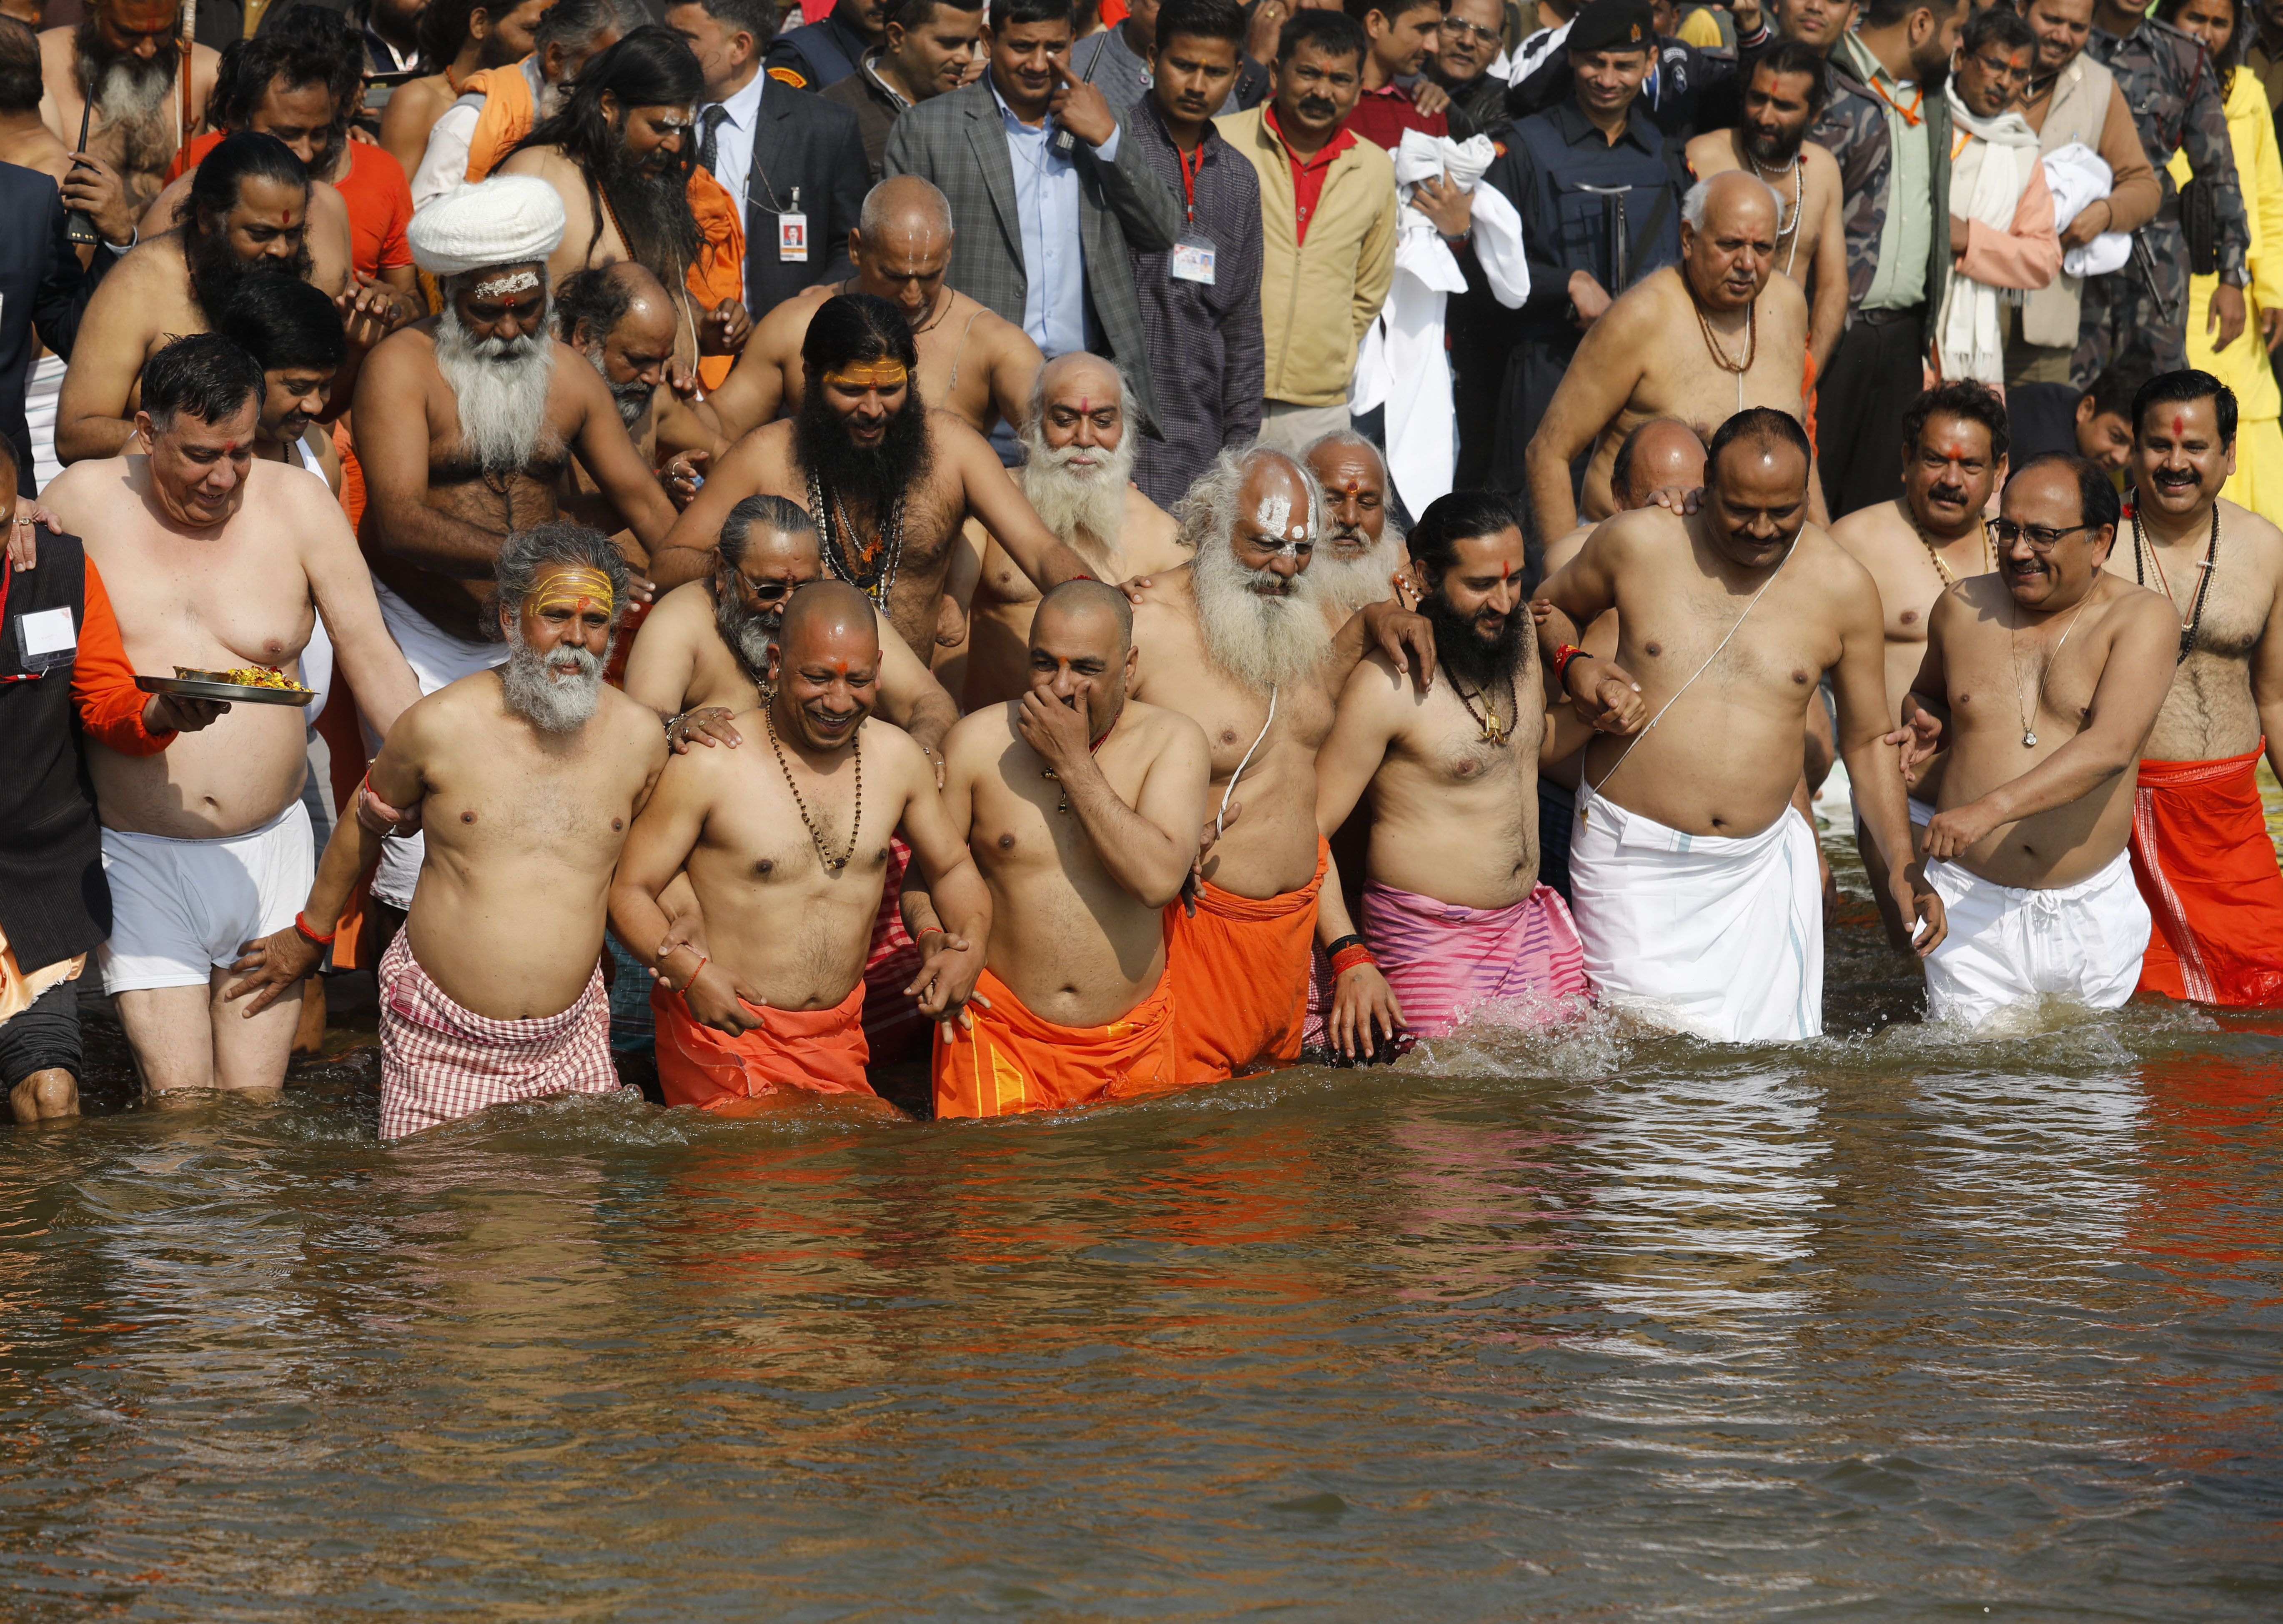 Chief Minister of Uttar Pradesh state Yogi Adityanath, front second left, takes a holy dip accompanied by saints and cabinet colleagues at the Sangam, the confluence of rivers Ganges and Yamuna, during the Kumbh Mela in Prayagraj, India, Tuesday, Jan. 29, 2019. The Kumbh Mela is a series of ritual baths by Hindu holy men, and other pilgrims at the confluence of three sacred rivers the Yamuna, the Ganges and the mythical Saraswati that dates back to at least medieval times. The city's Mughal-era name Allahabad was recently changed to Prayagraj. (AP Photo/Rajesh Kumar Singh)